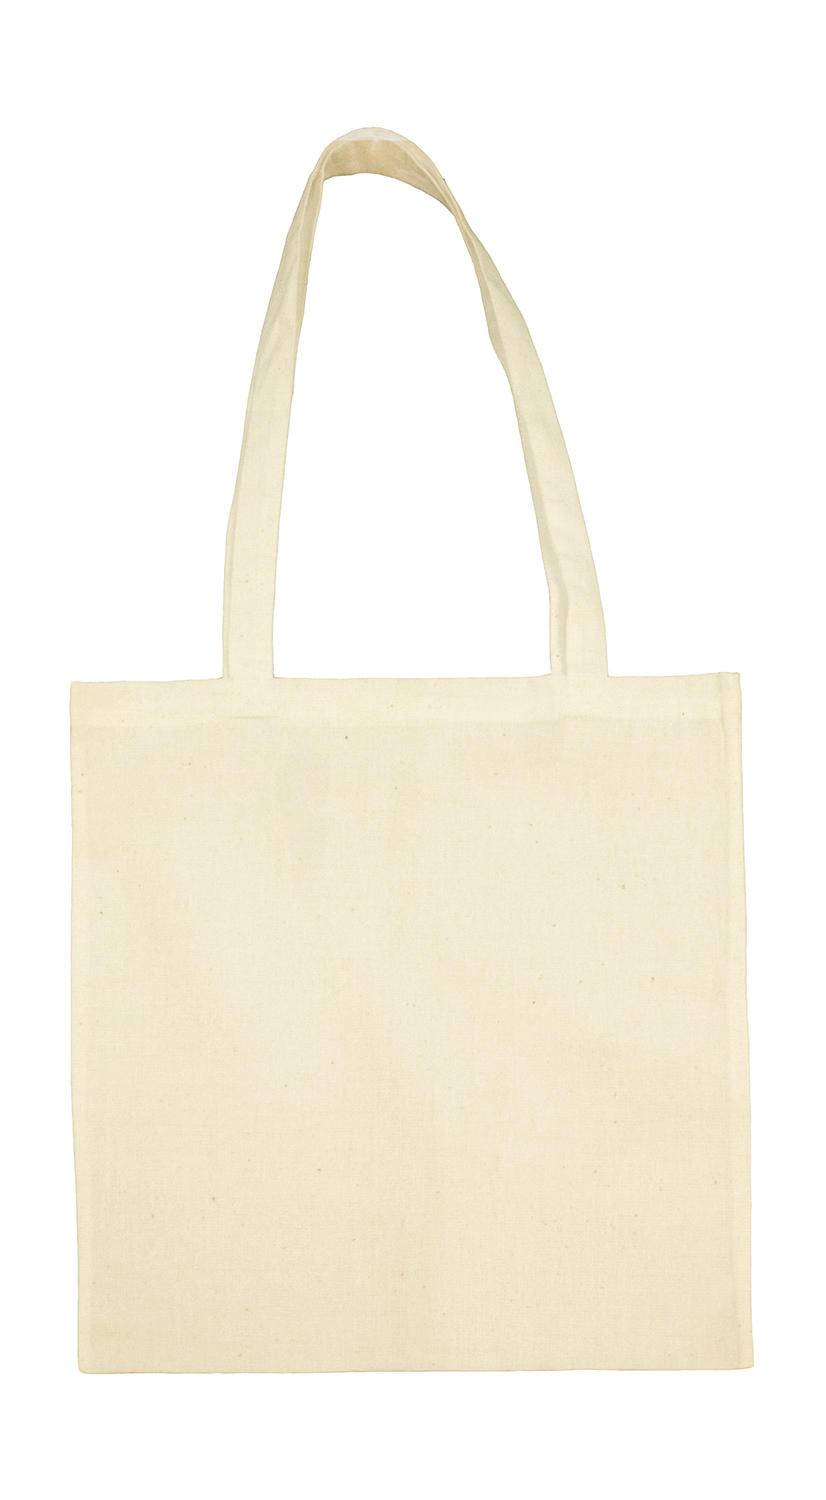  Cotton Bag LH in Farbe Natural